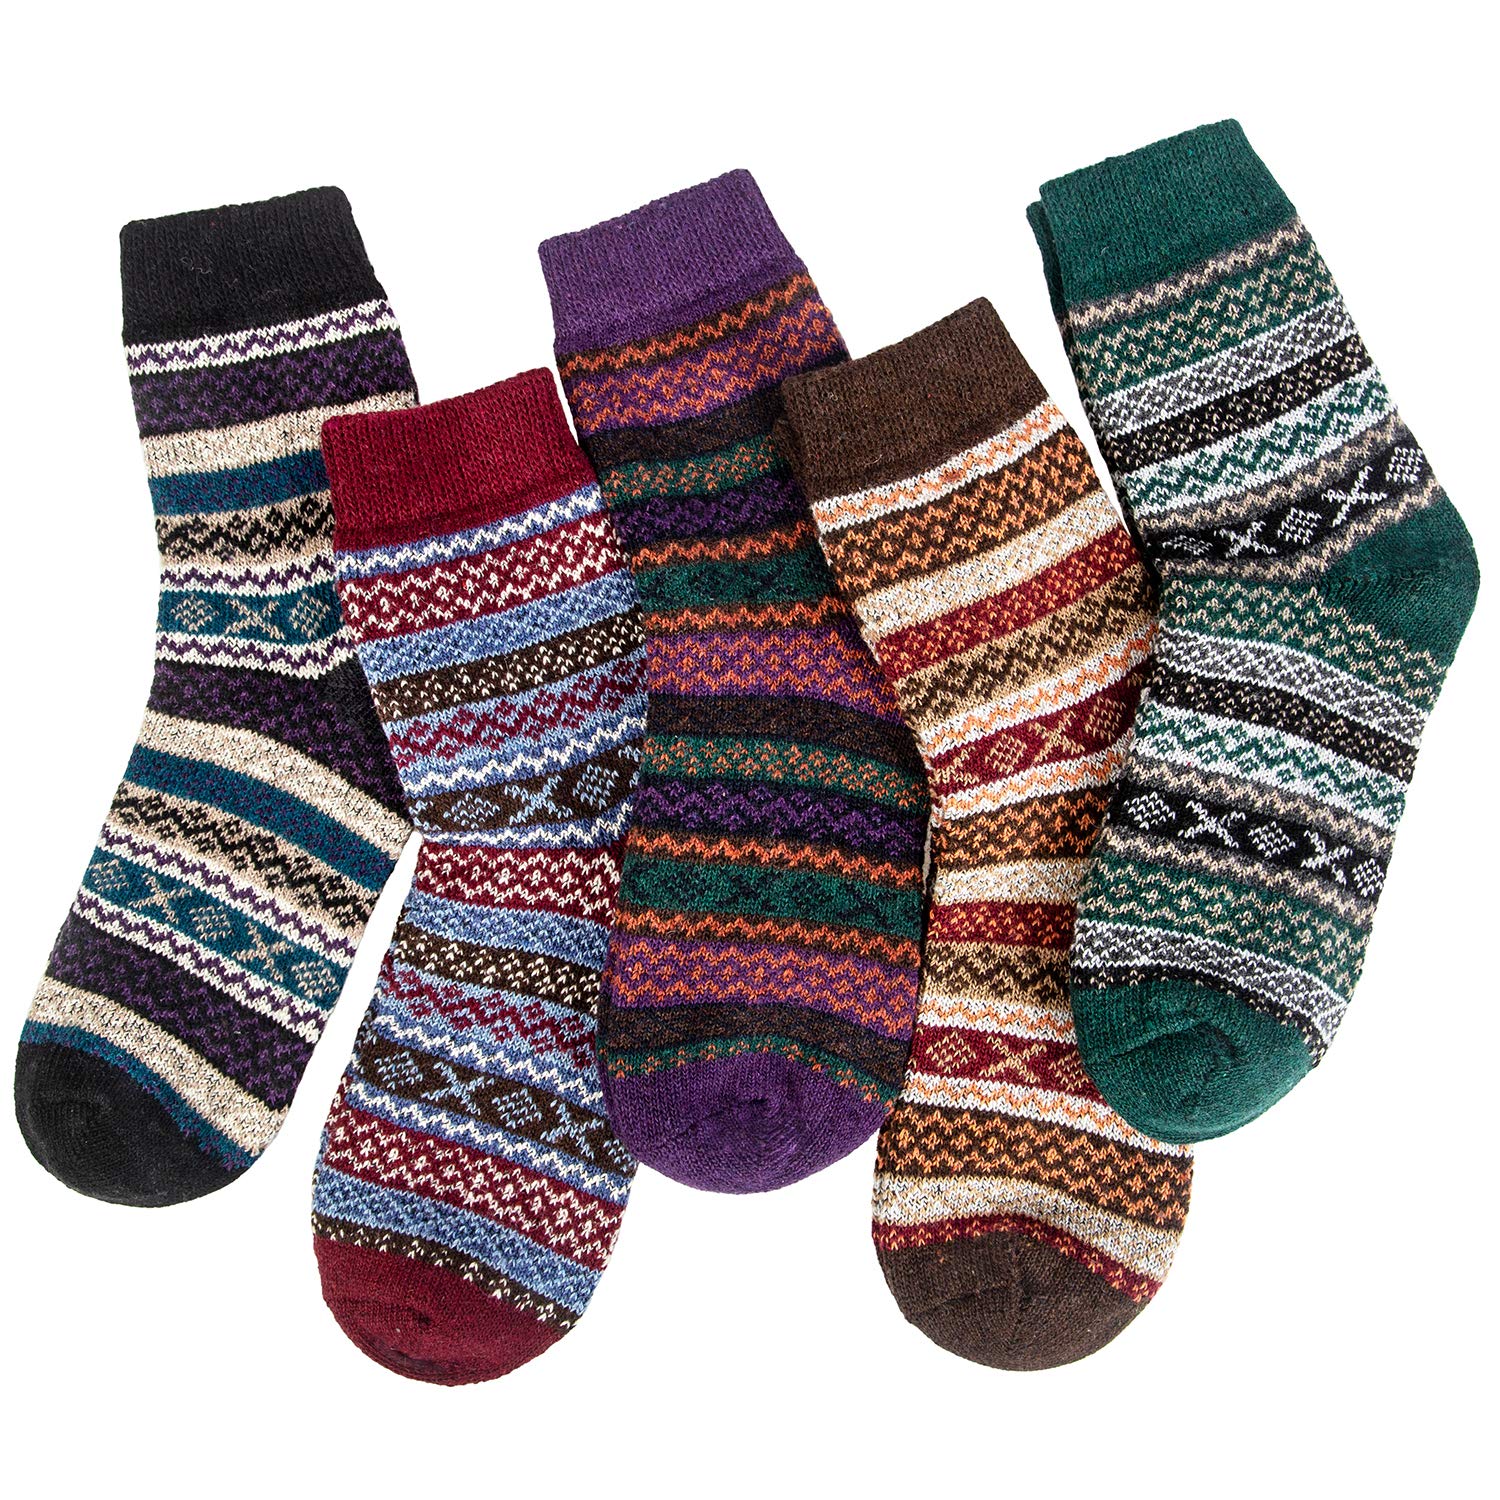 Pack of 5 Womens Winter Socks Warm Thick Knit Wool Soft Vintage Casual Crew Socks Gifts,D-multicolored Horizontal Stripes